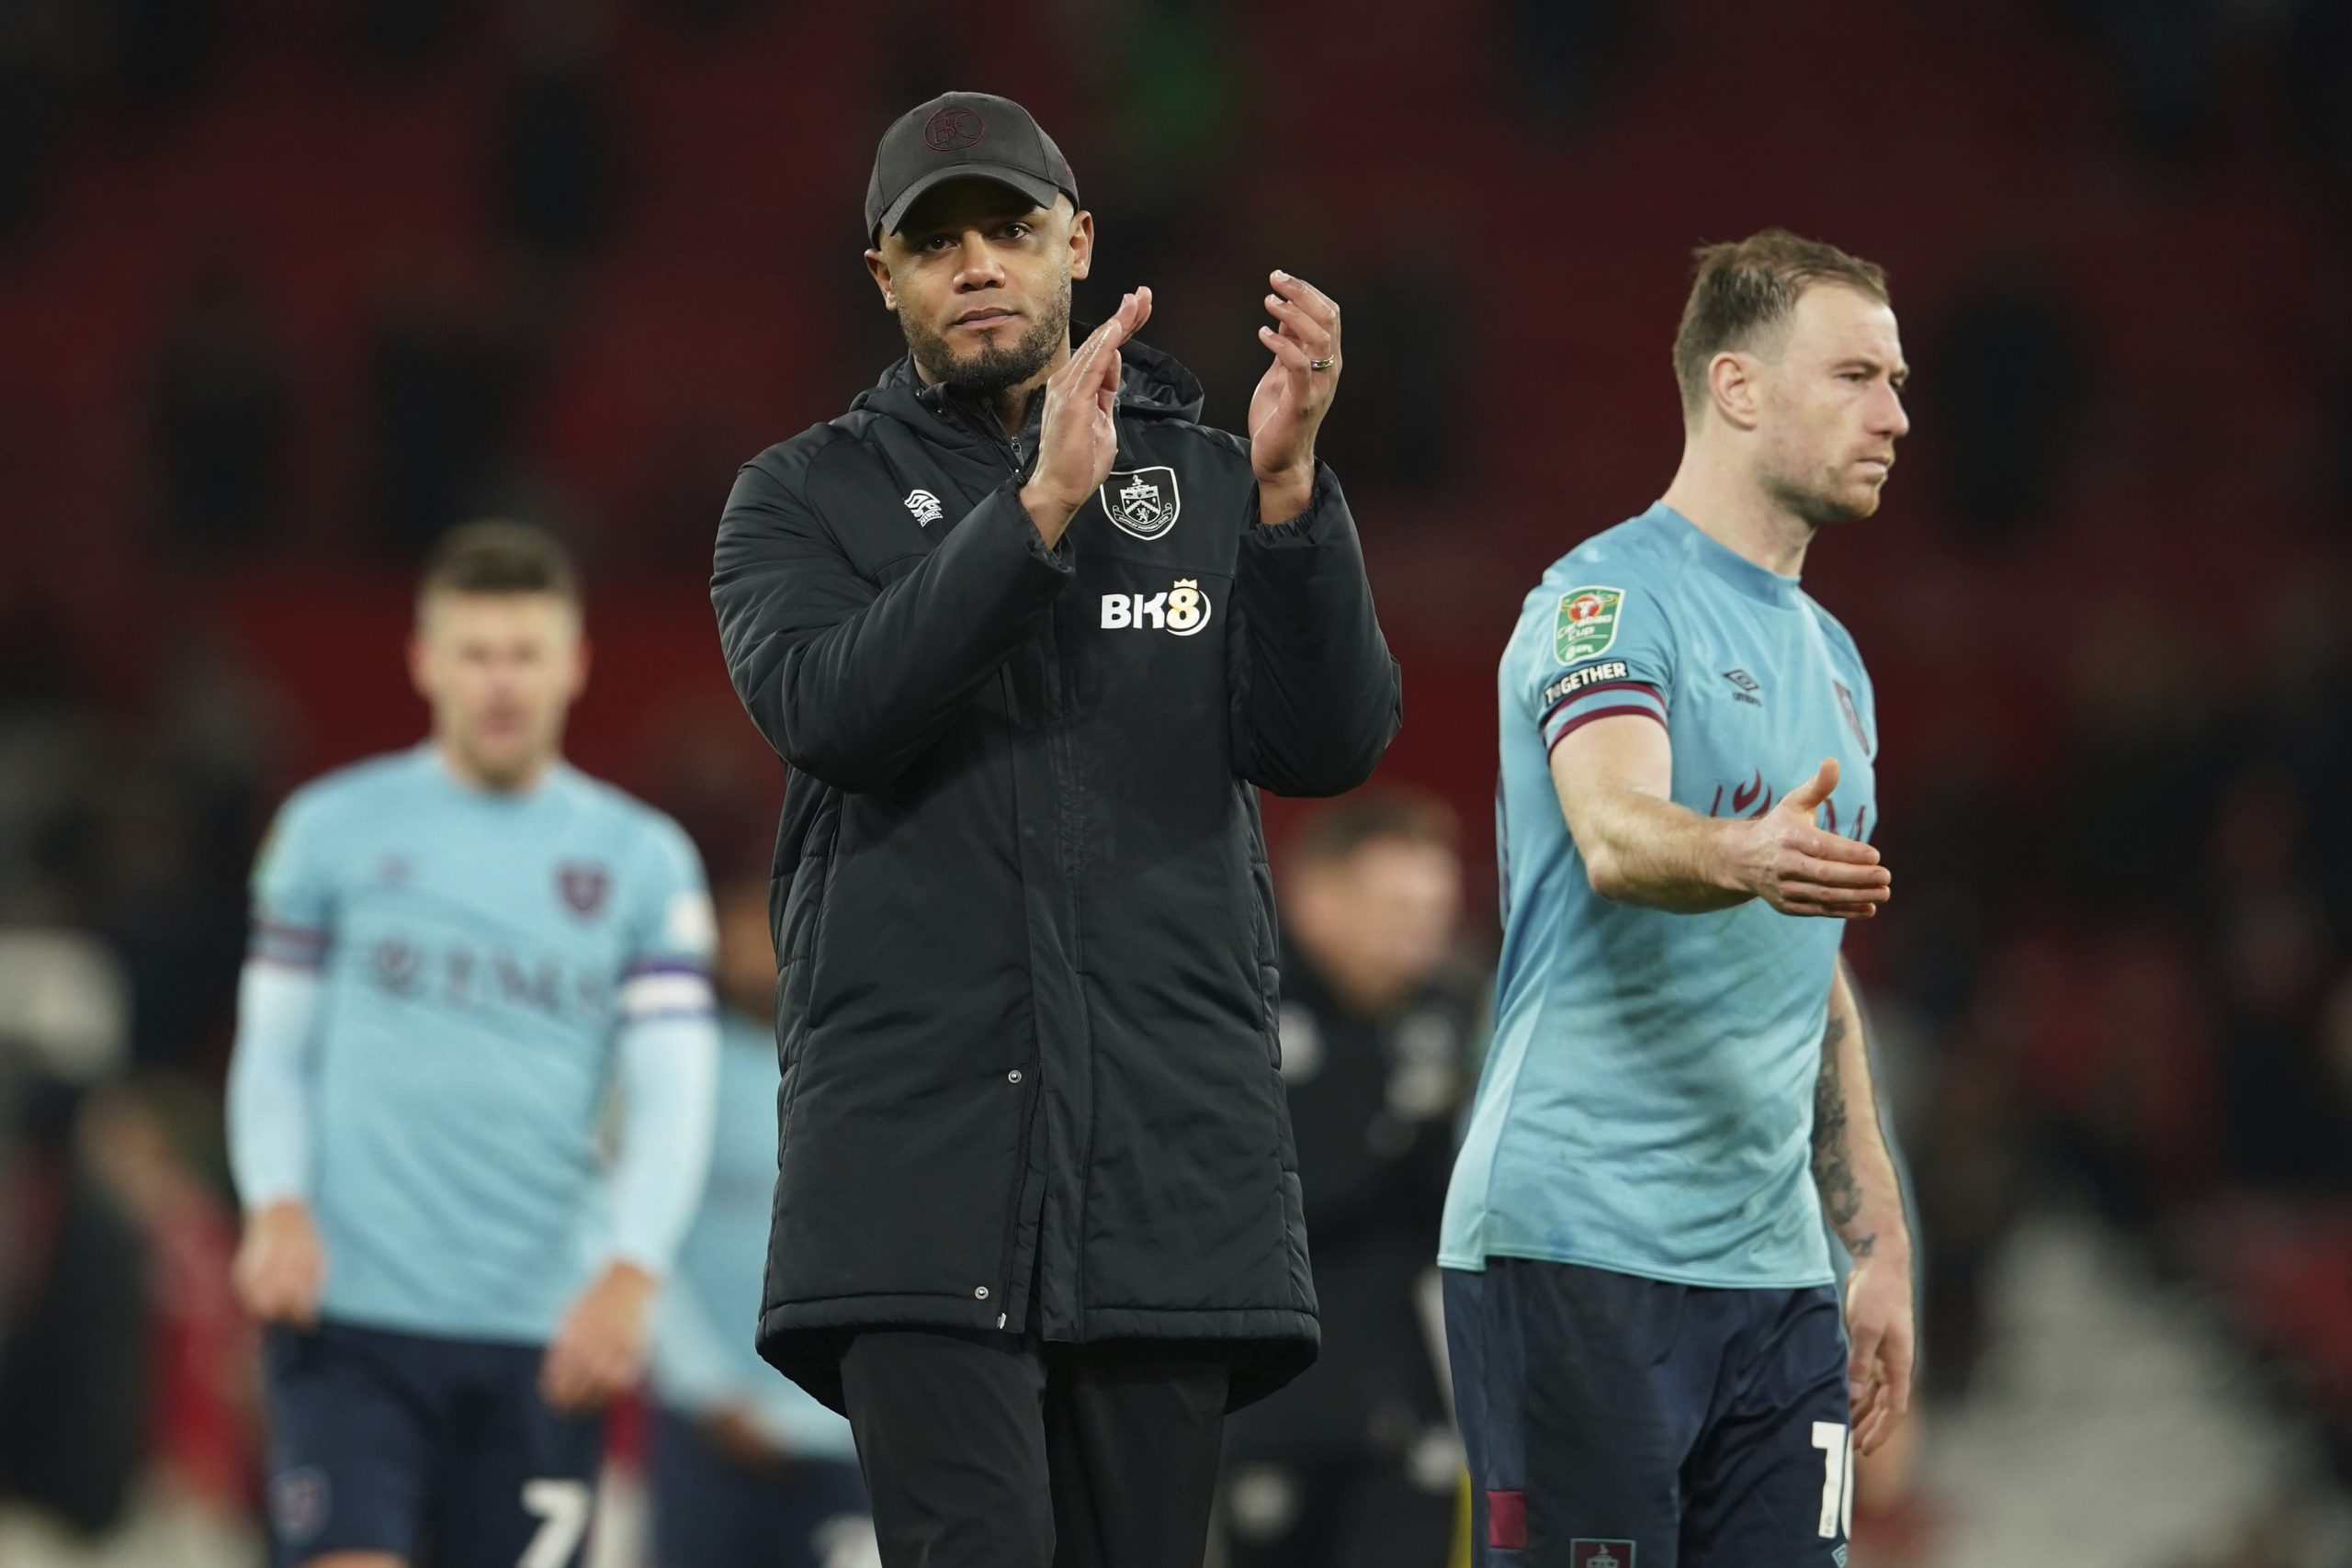 Burnley's manager Vincent Kompany applauds his teams fans after the end of the English League Cup 4th round soccer match between Manchester United and Burnley, at Old Trafford in Manchester, England Wednesday, Dec. 21, 2022. United won the game 2-0. (AP Photo/Dave Thompson)